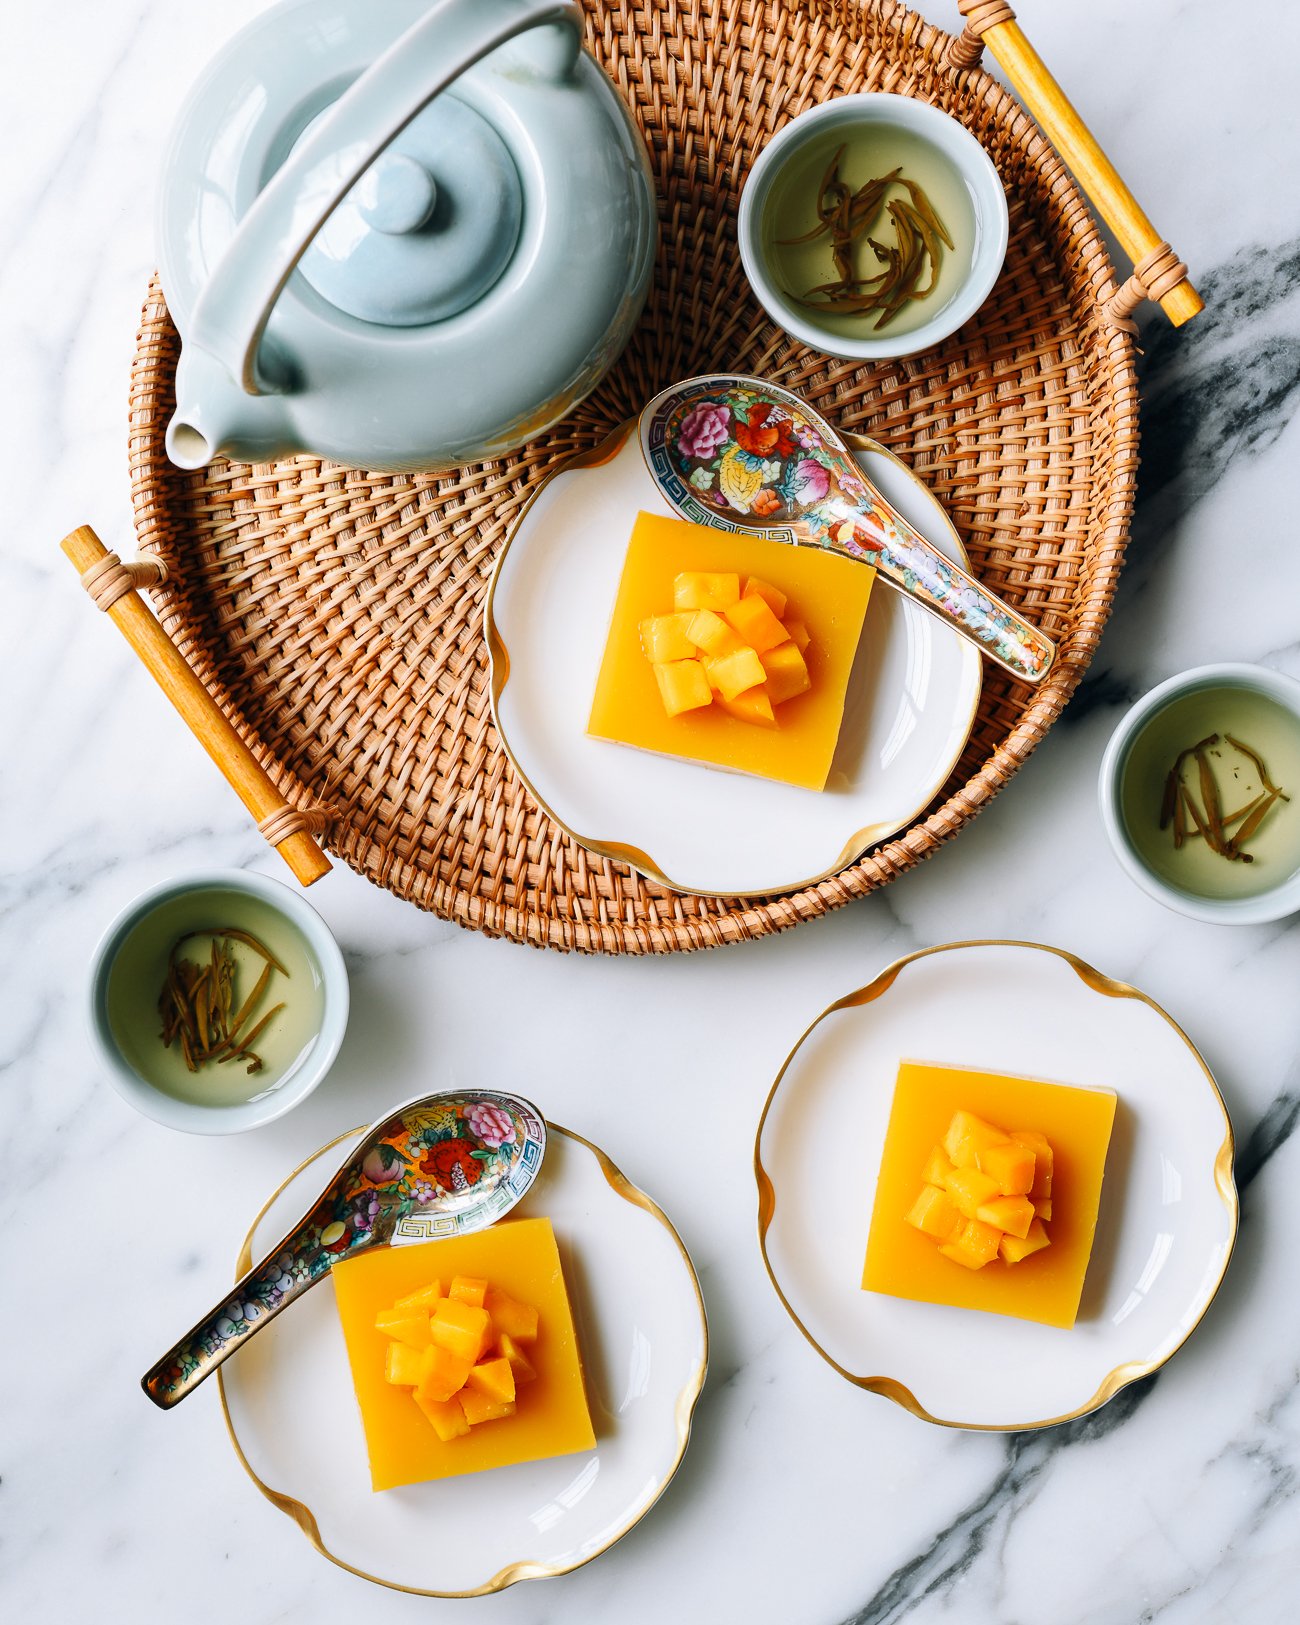 Squares of Mango Pudding on plates with tea